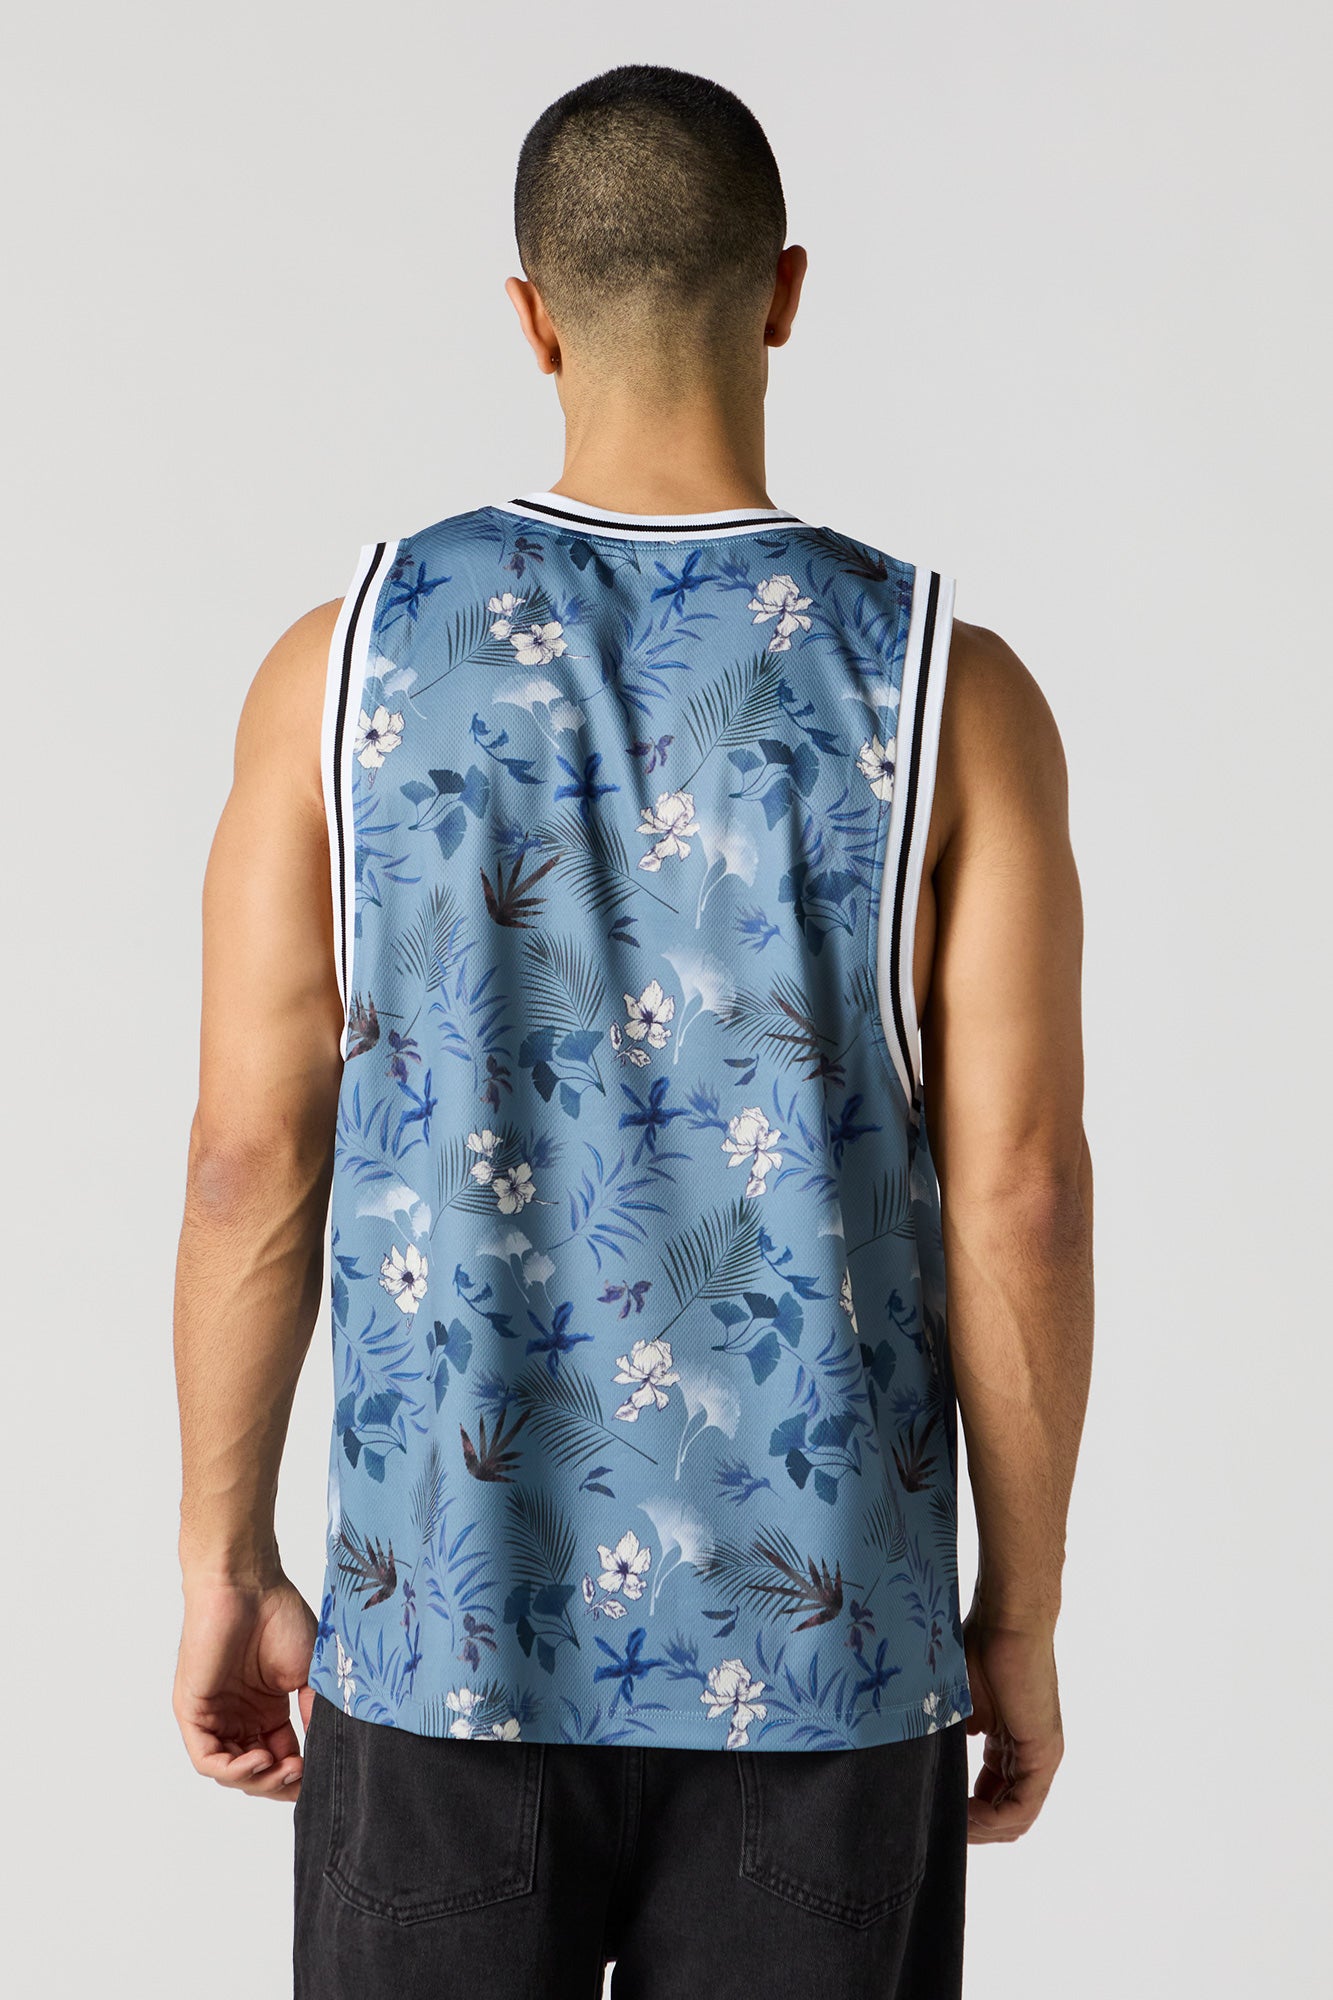 Floral Print Palm Springs Graphic Basketball Jersey